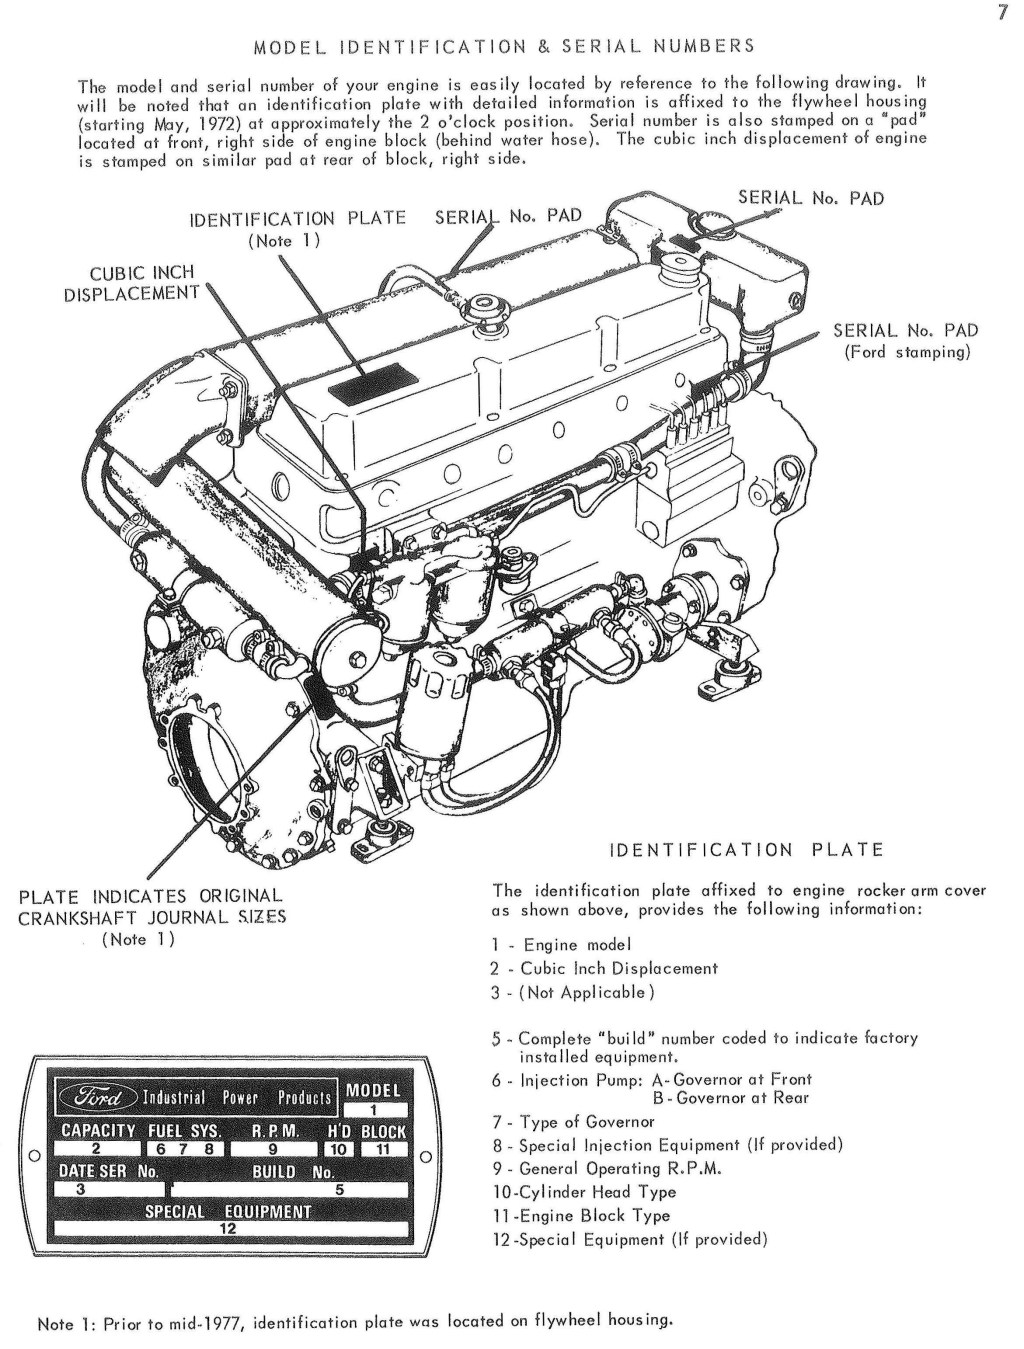 Picture of: Ford Industrial Engine Production Dates by Serial Numbers